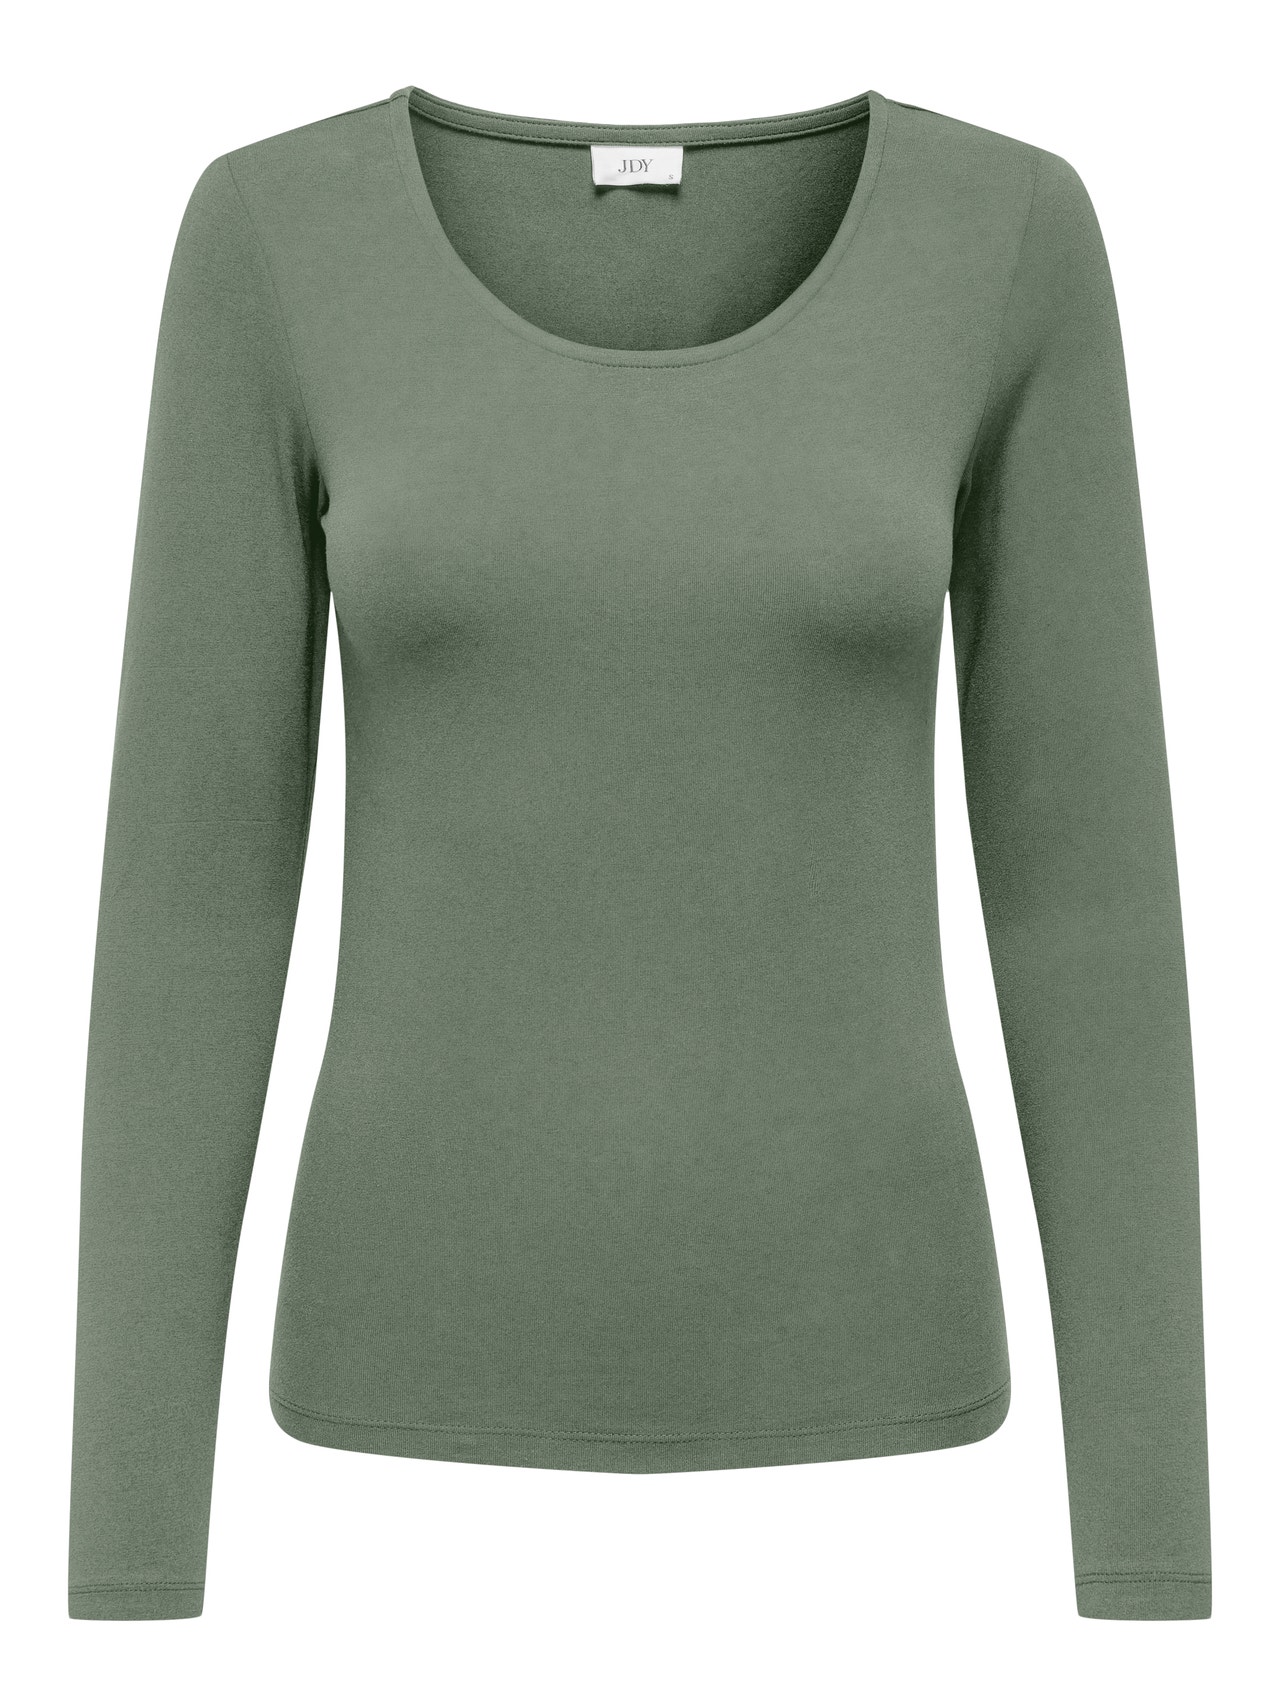 ONLY Tight fitted top -Sea Spray - 15300684